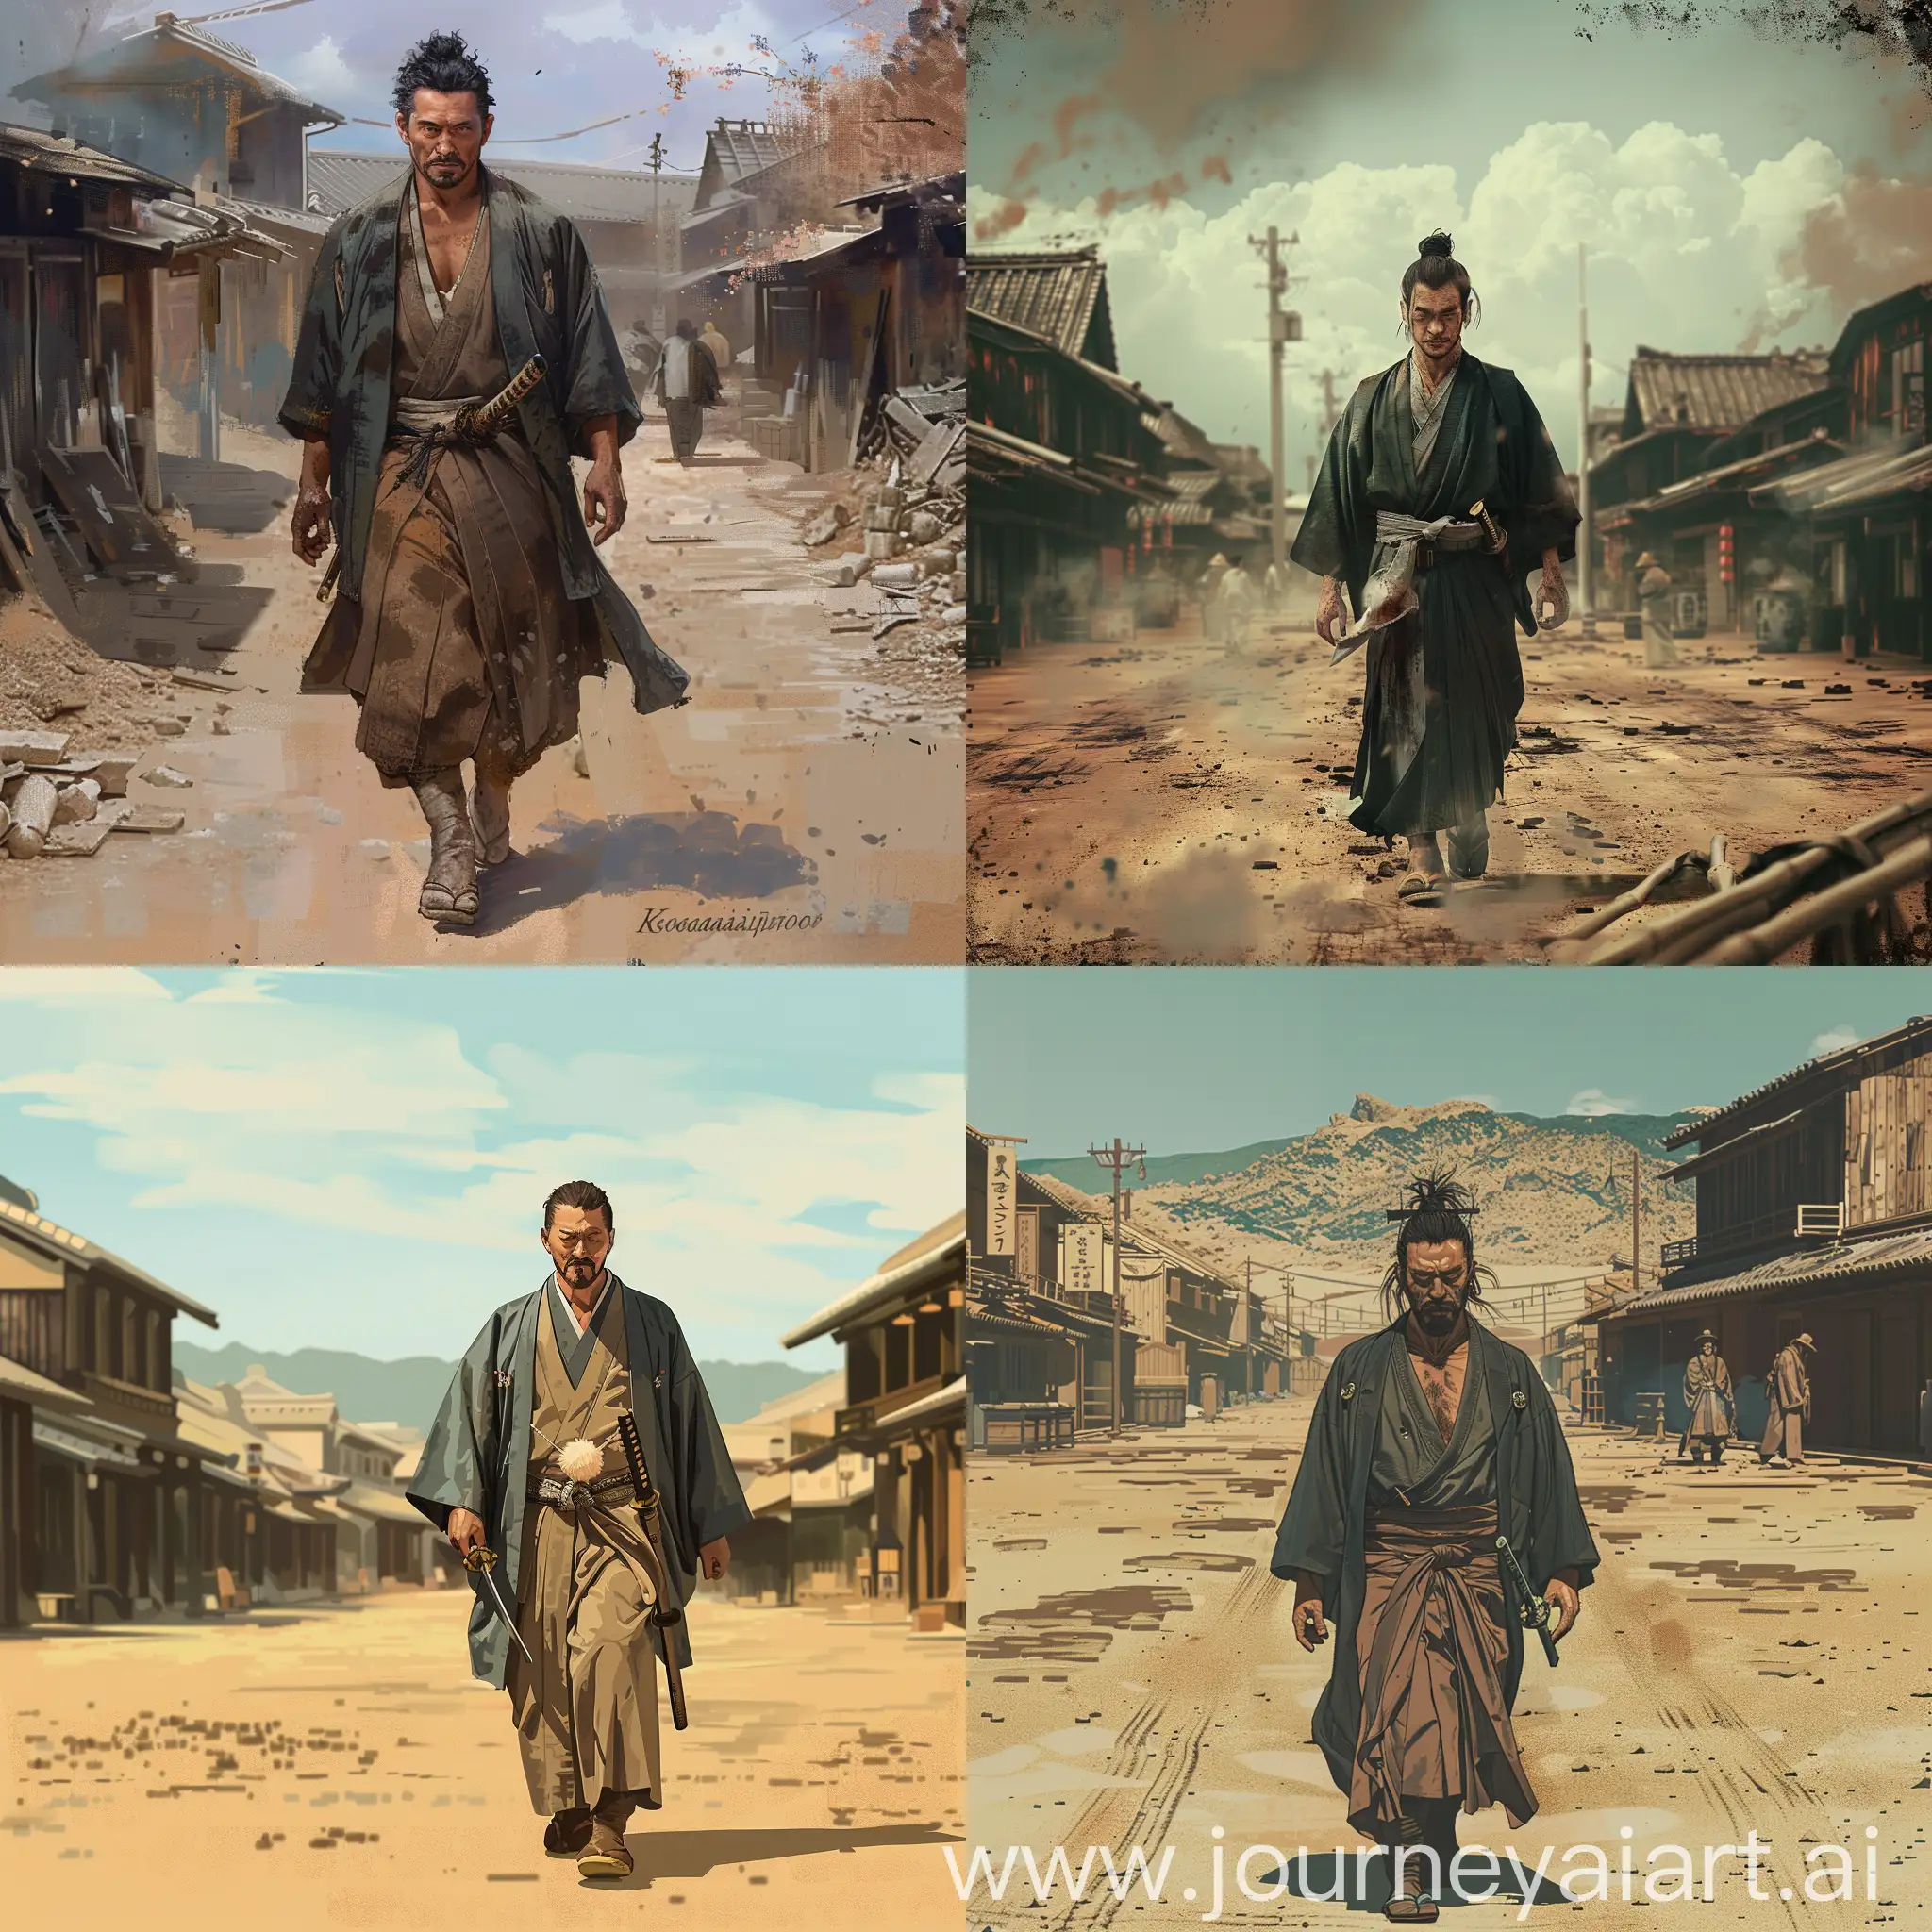 Illustration of a yakuza-like gambler in Edo period travel attire walking through a post town, with a short Japanese sword on his waist, with a stern face and figure. Drawing and photo of the historical drama Kogarashi Monjiro, based on the original work by Sasagawa Saho, with a deserted Edo period post town as the background, inspired motif (((Kogarashi Monjiro,, Kazuo Koike, the concept art is a masterpiece of precise detail and severity. The perspective chosen for the illustration is from the overall view of the scene to the right front perspective of a mid-to-long distance shot. Detailed illustration, hq, sharpfocus, smooth, cgstasion, Anime style